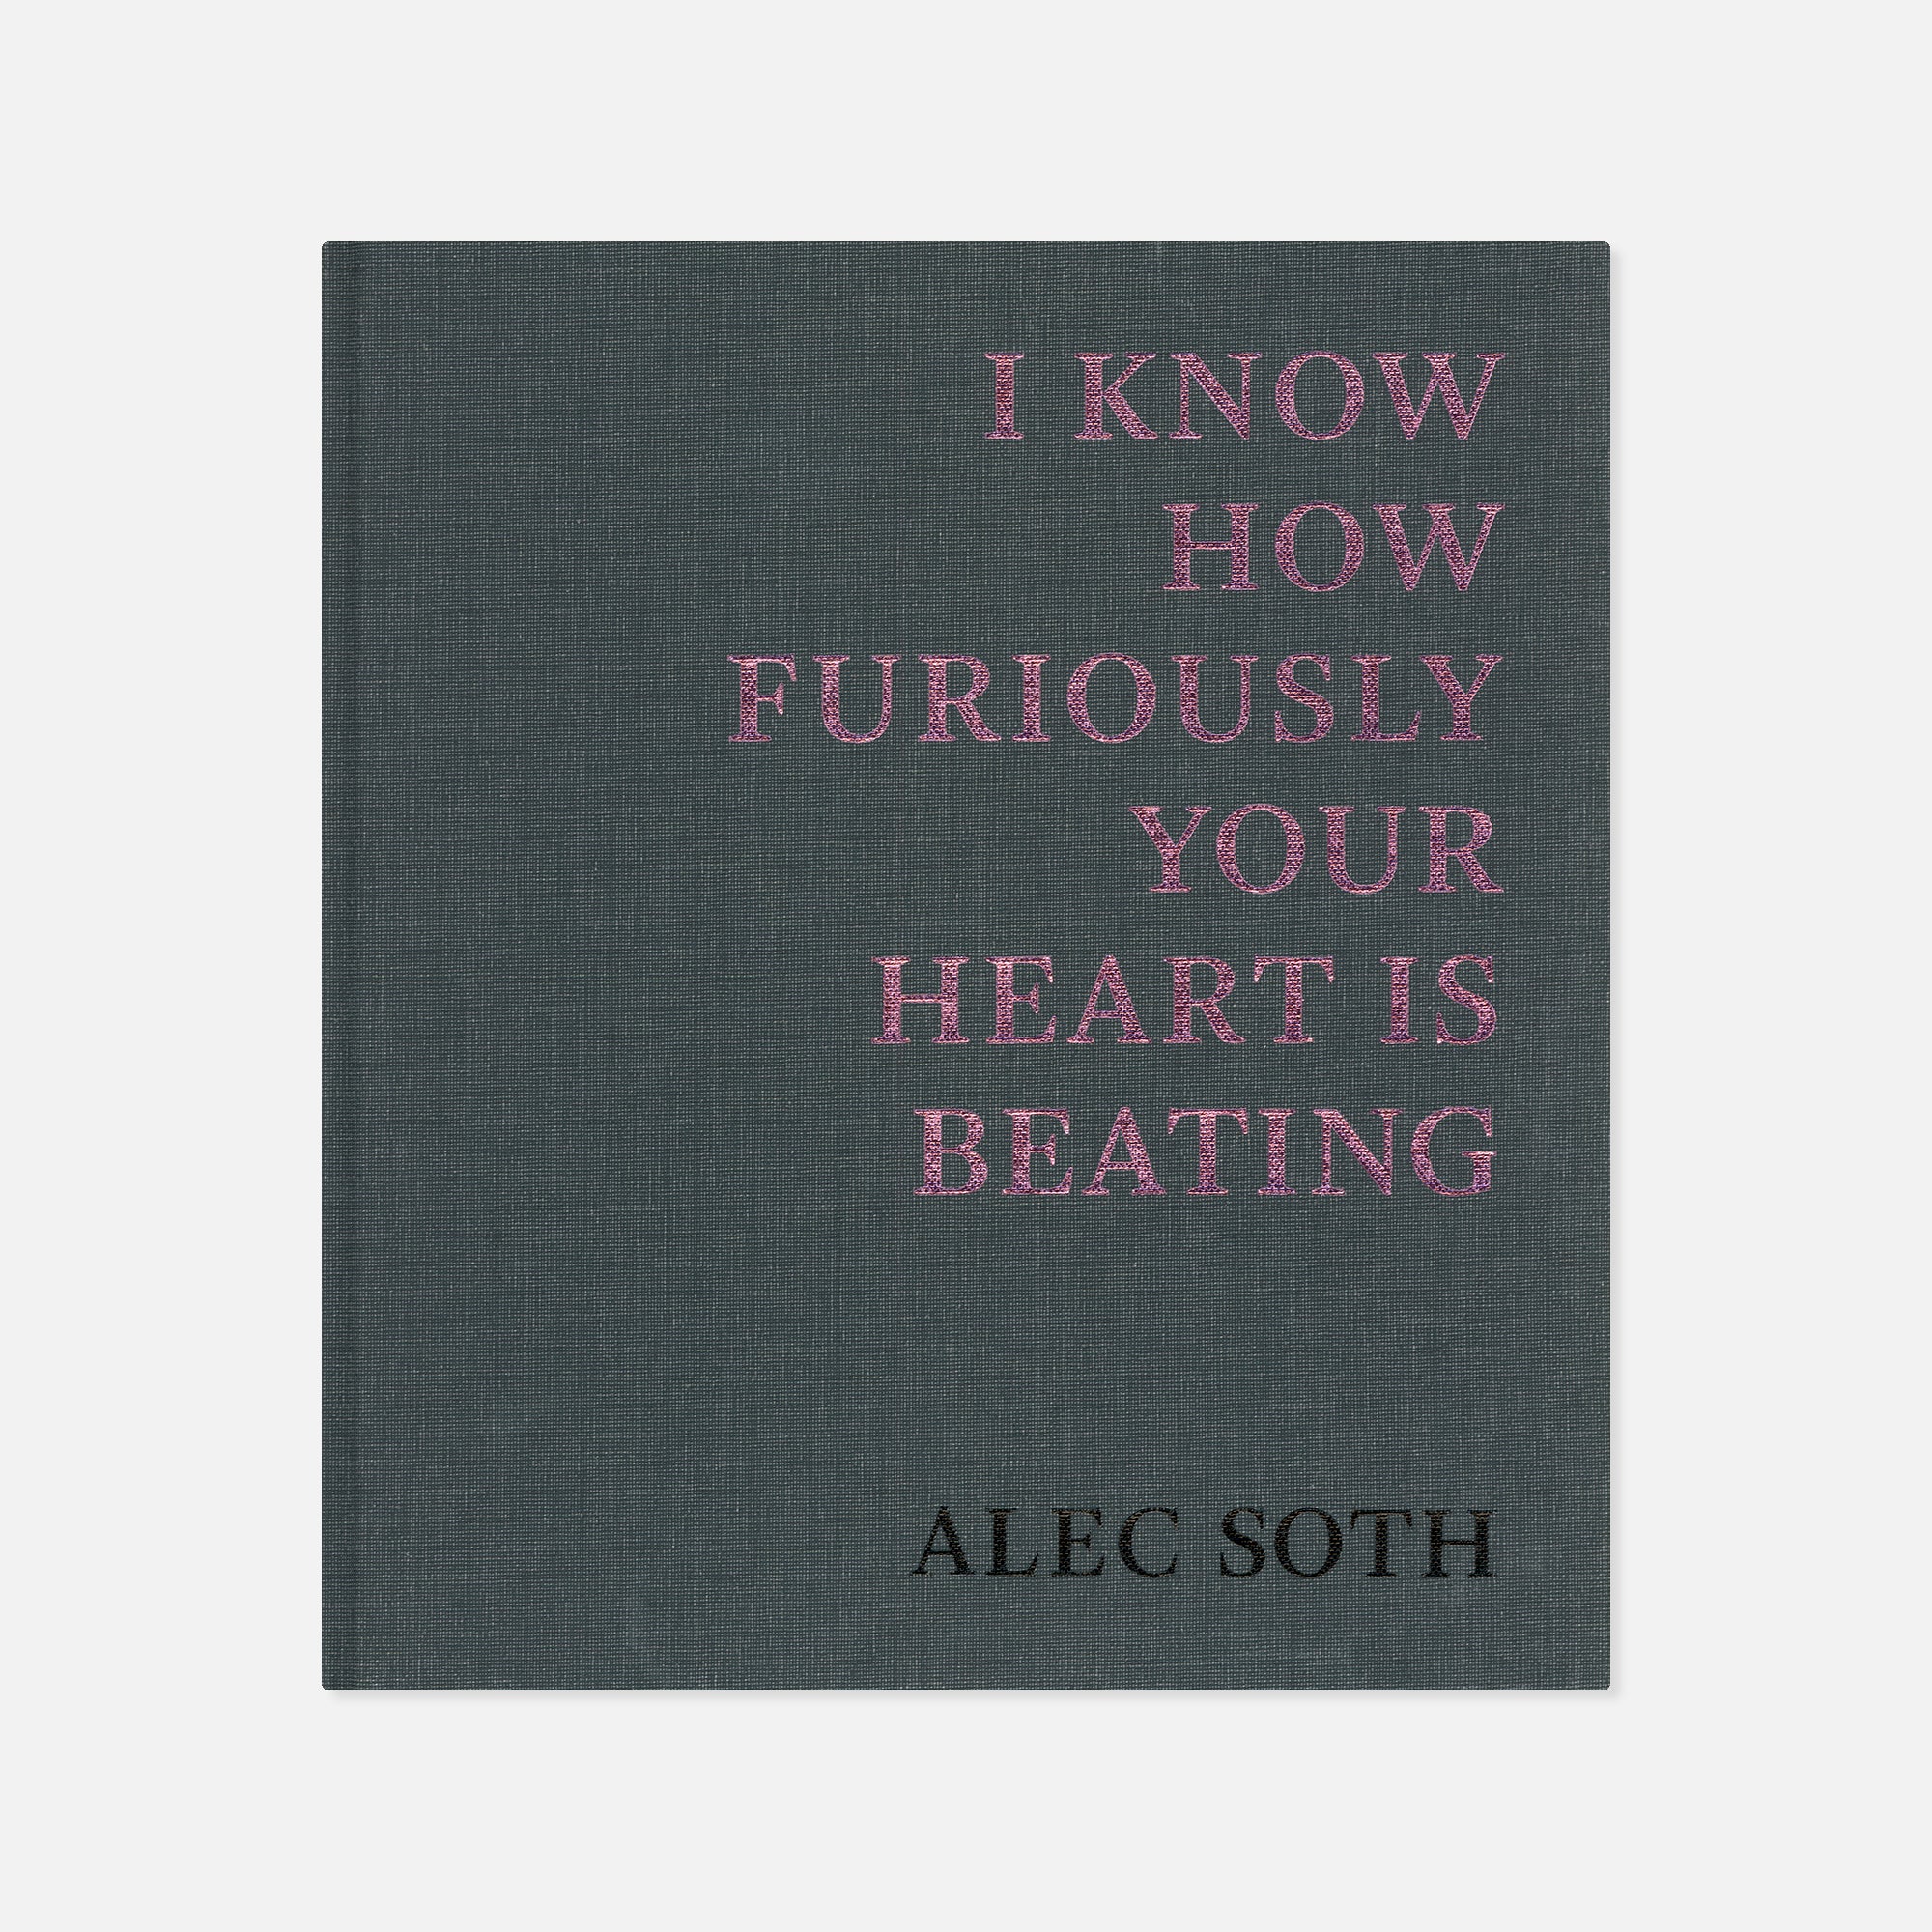 Alec Soth — I Know How Furiously Your Heart Is Beating